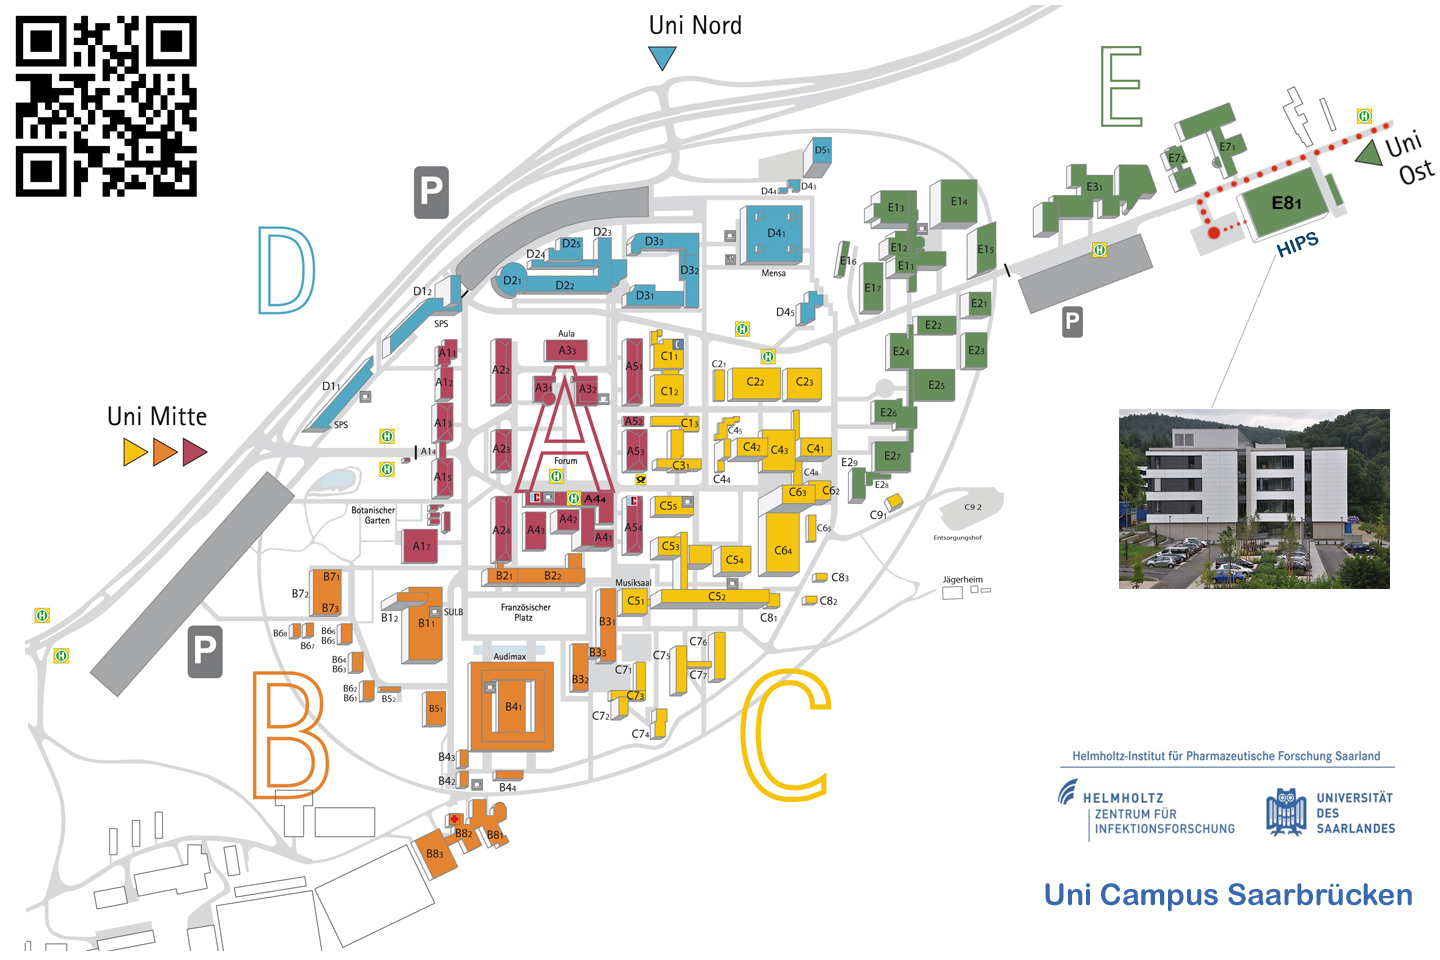 HIPS campus map